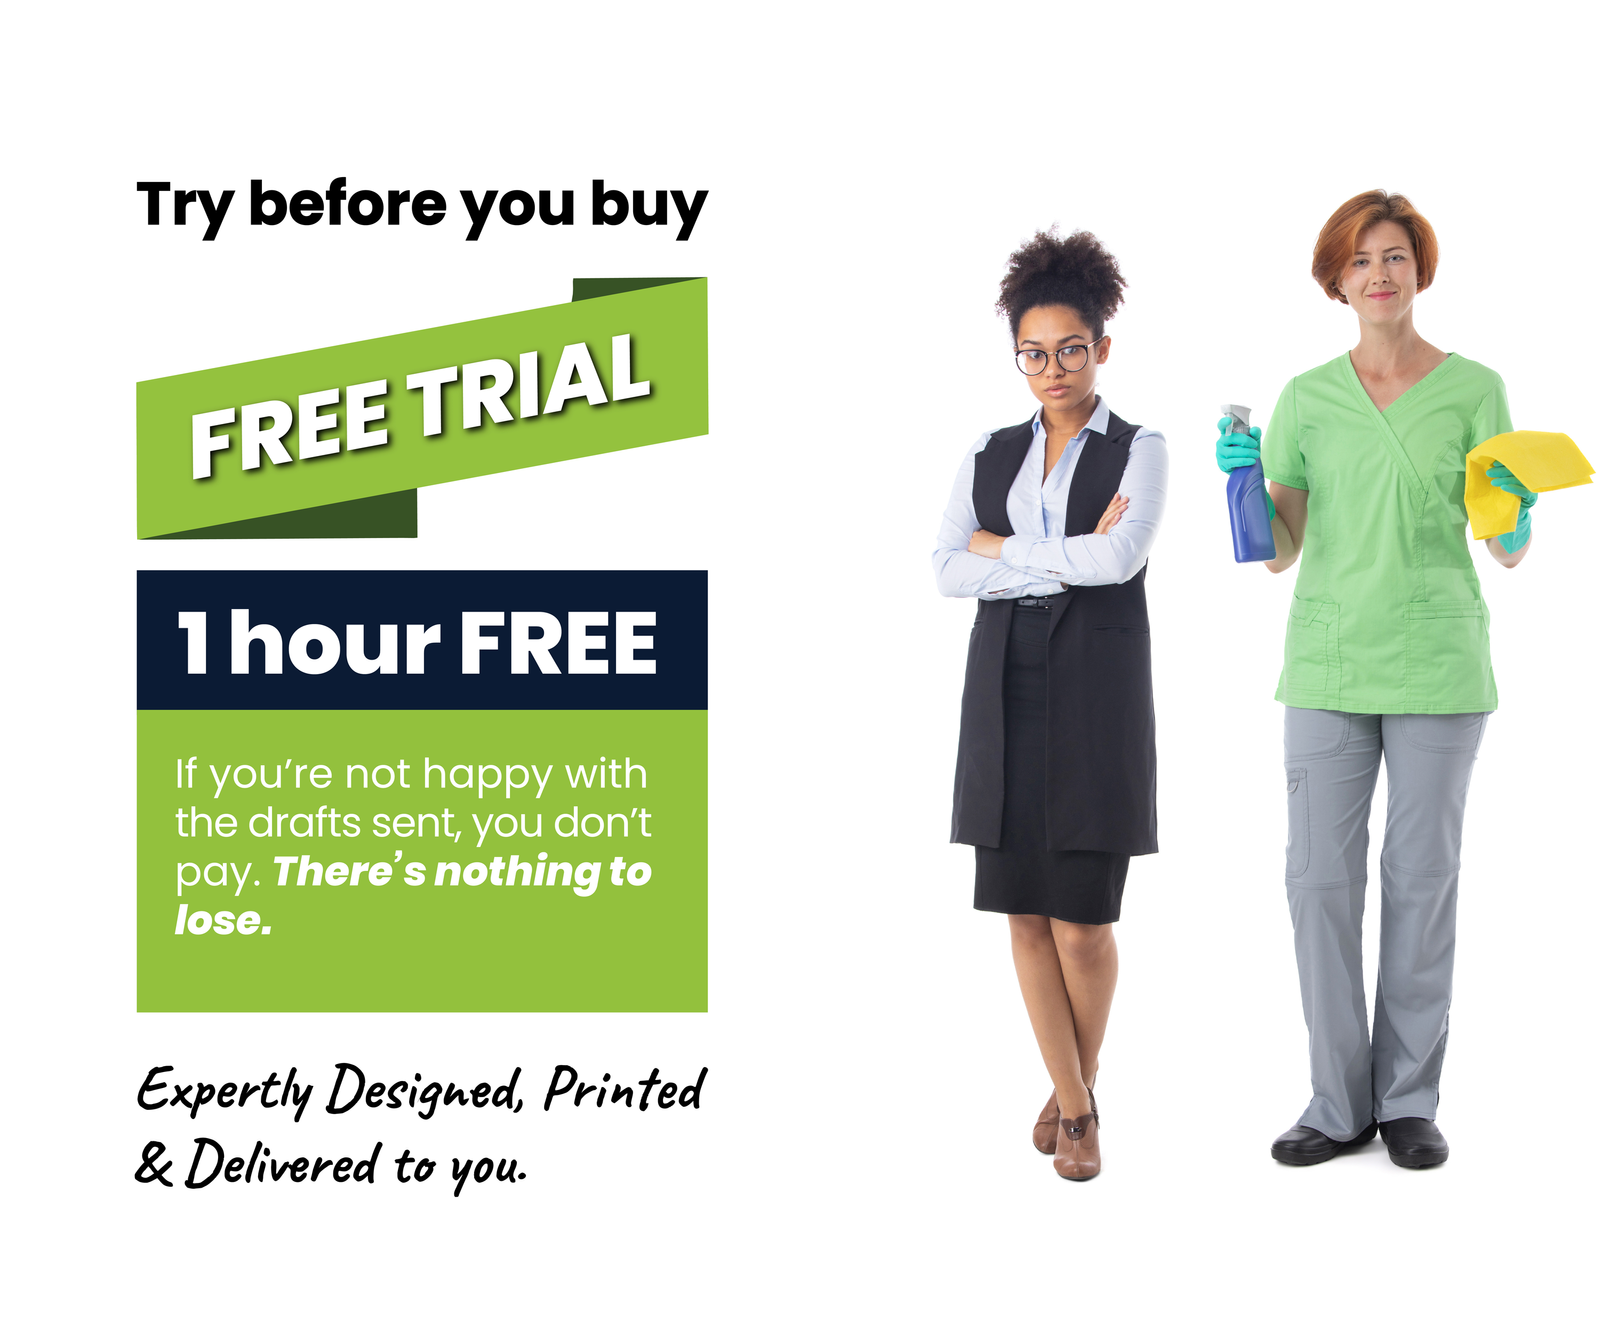 My-Graphic-designer-1-hour-free-trial-try-before-you-buy-poole-bournemouth-dorset